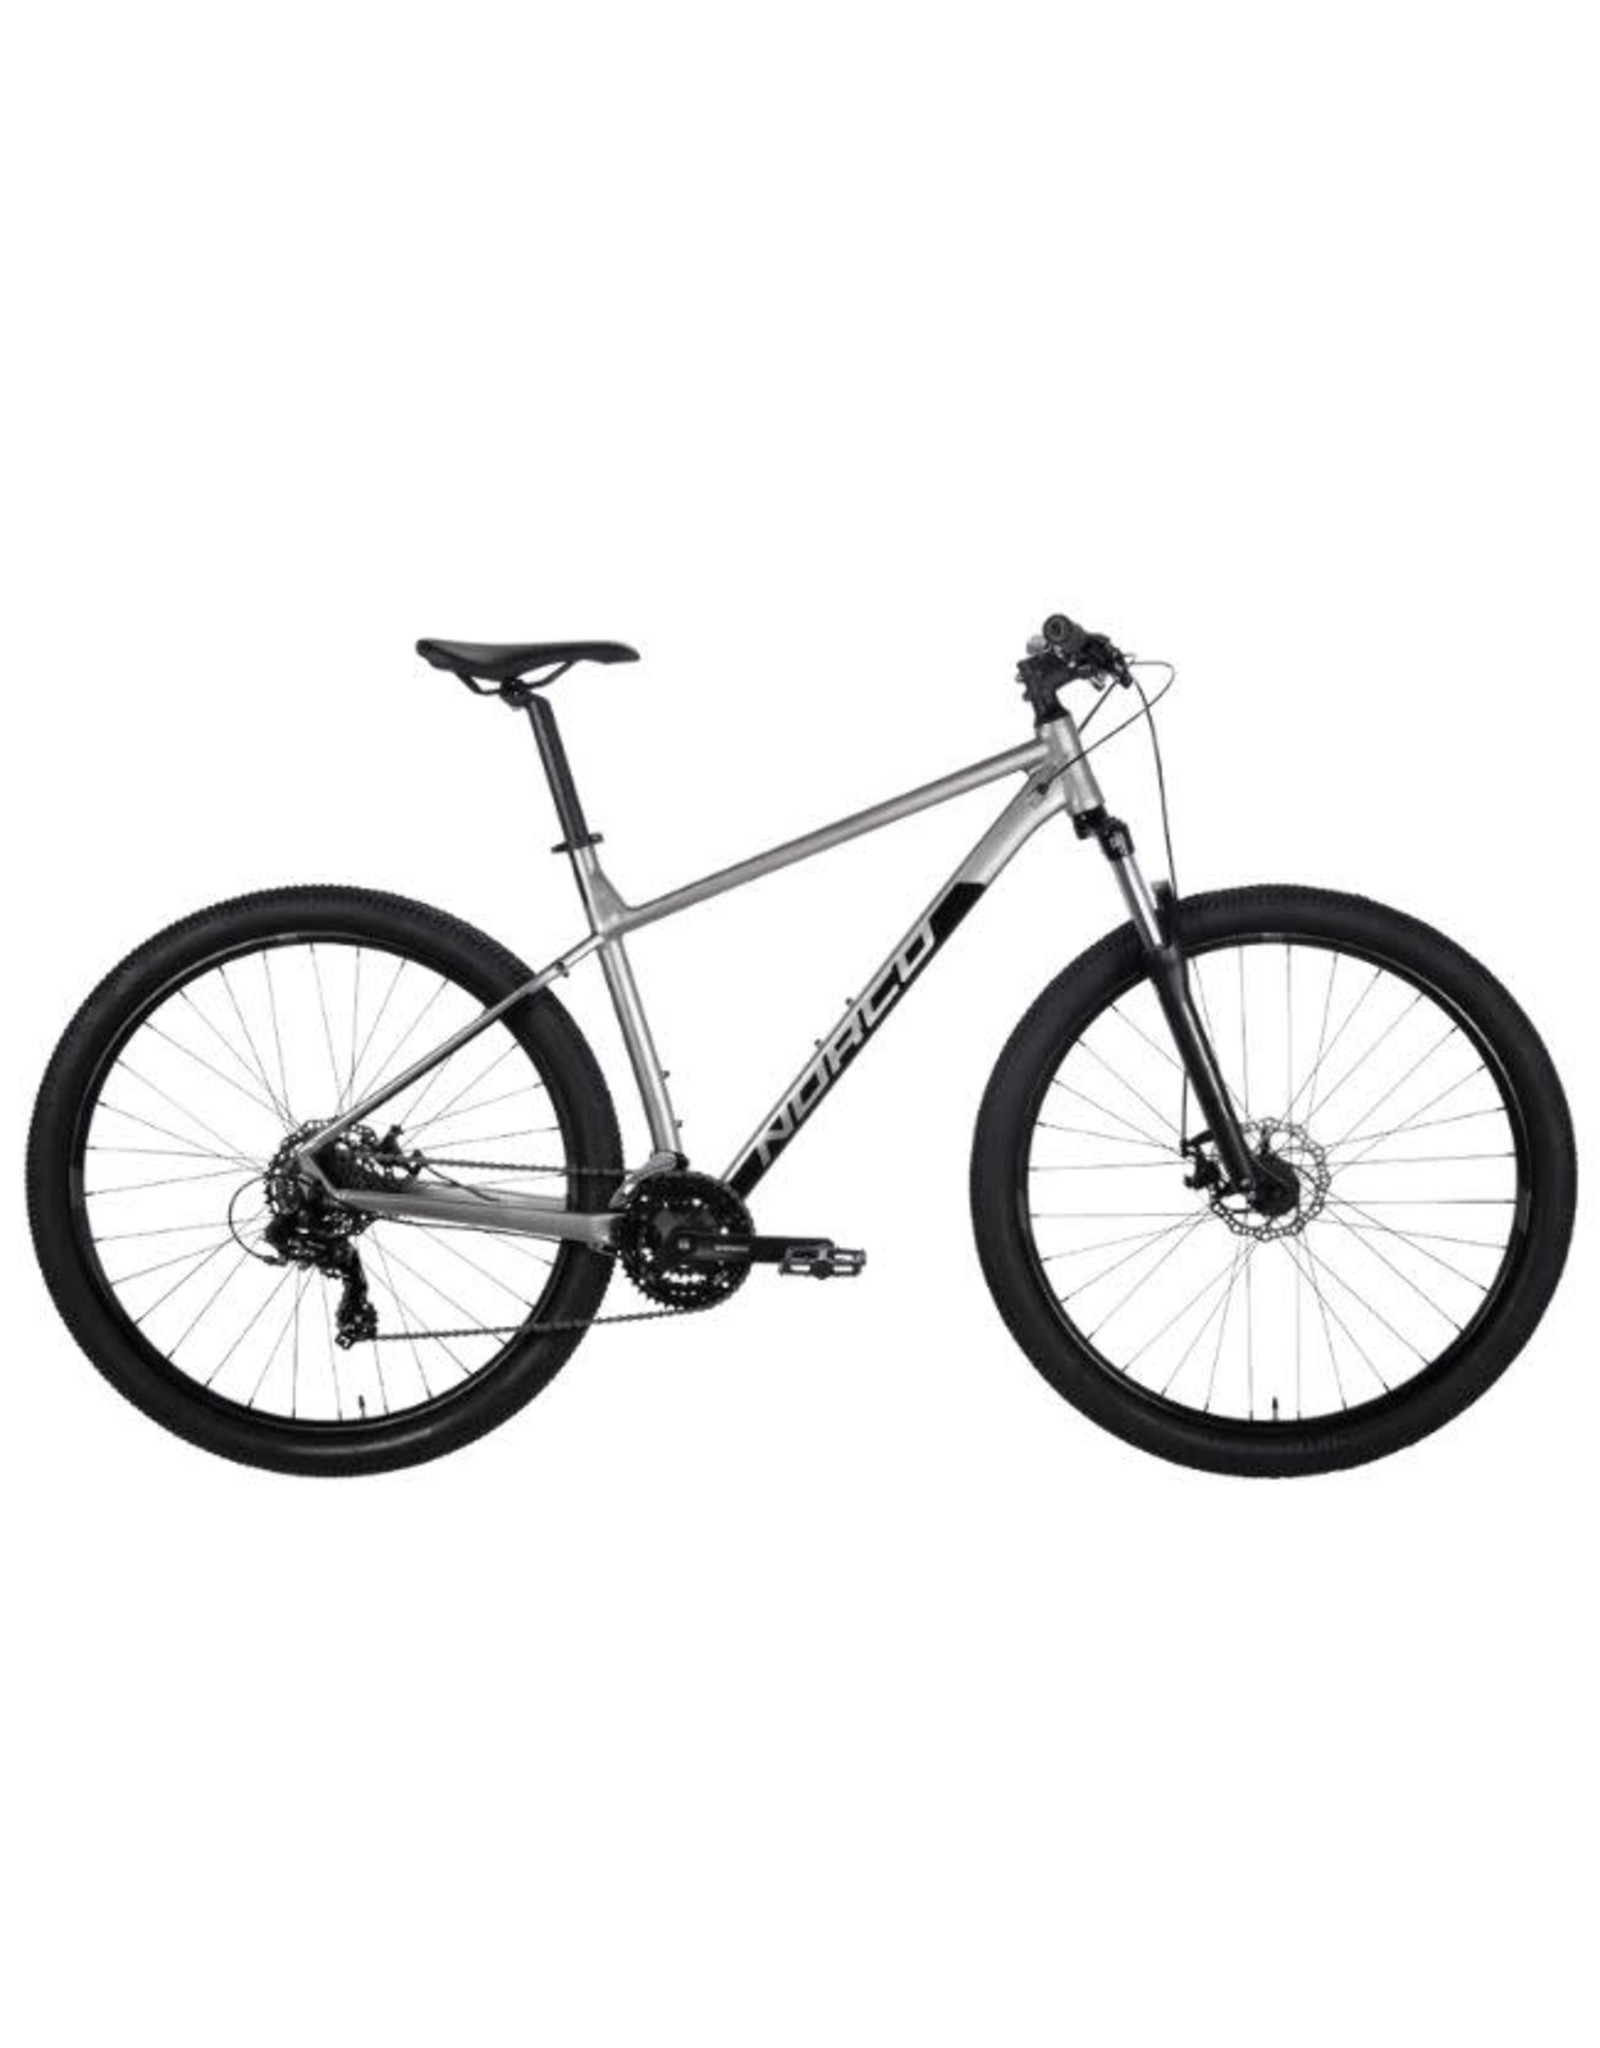 Norco Norco Storm 5 - 27.5 - ON SALE